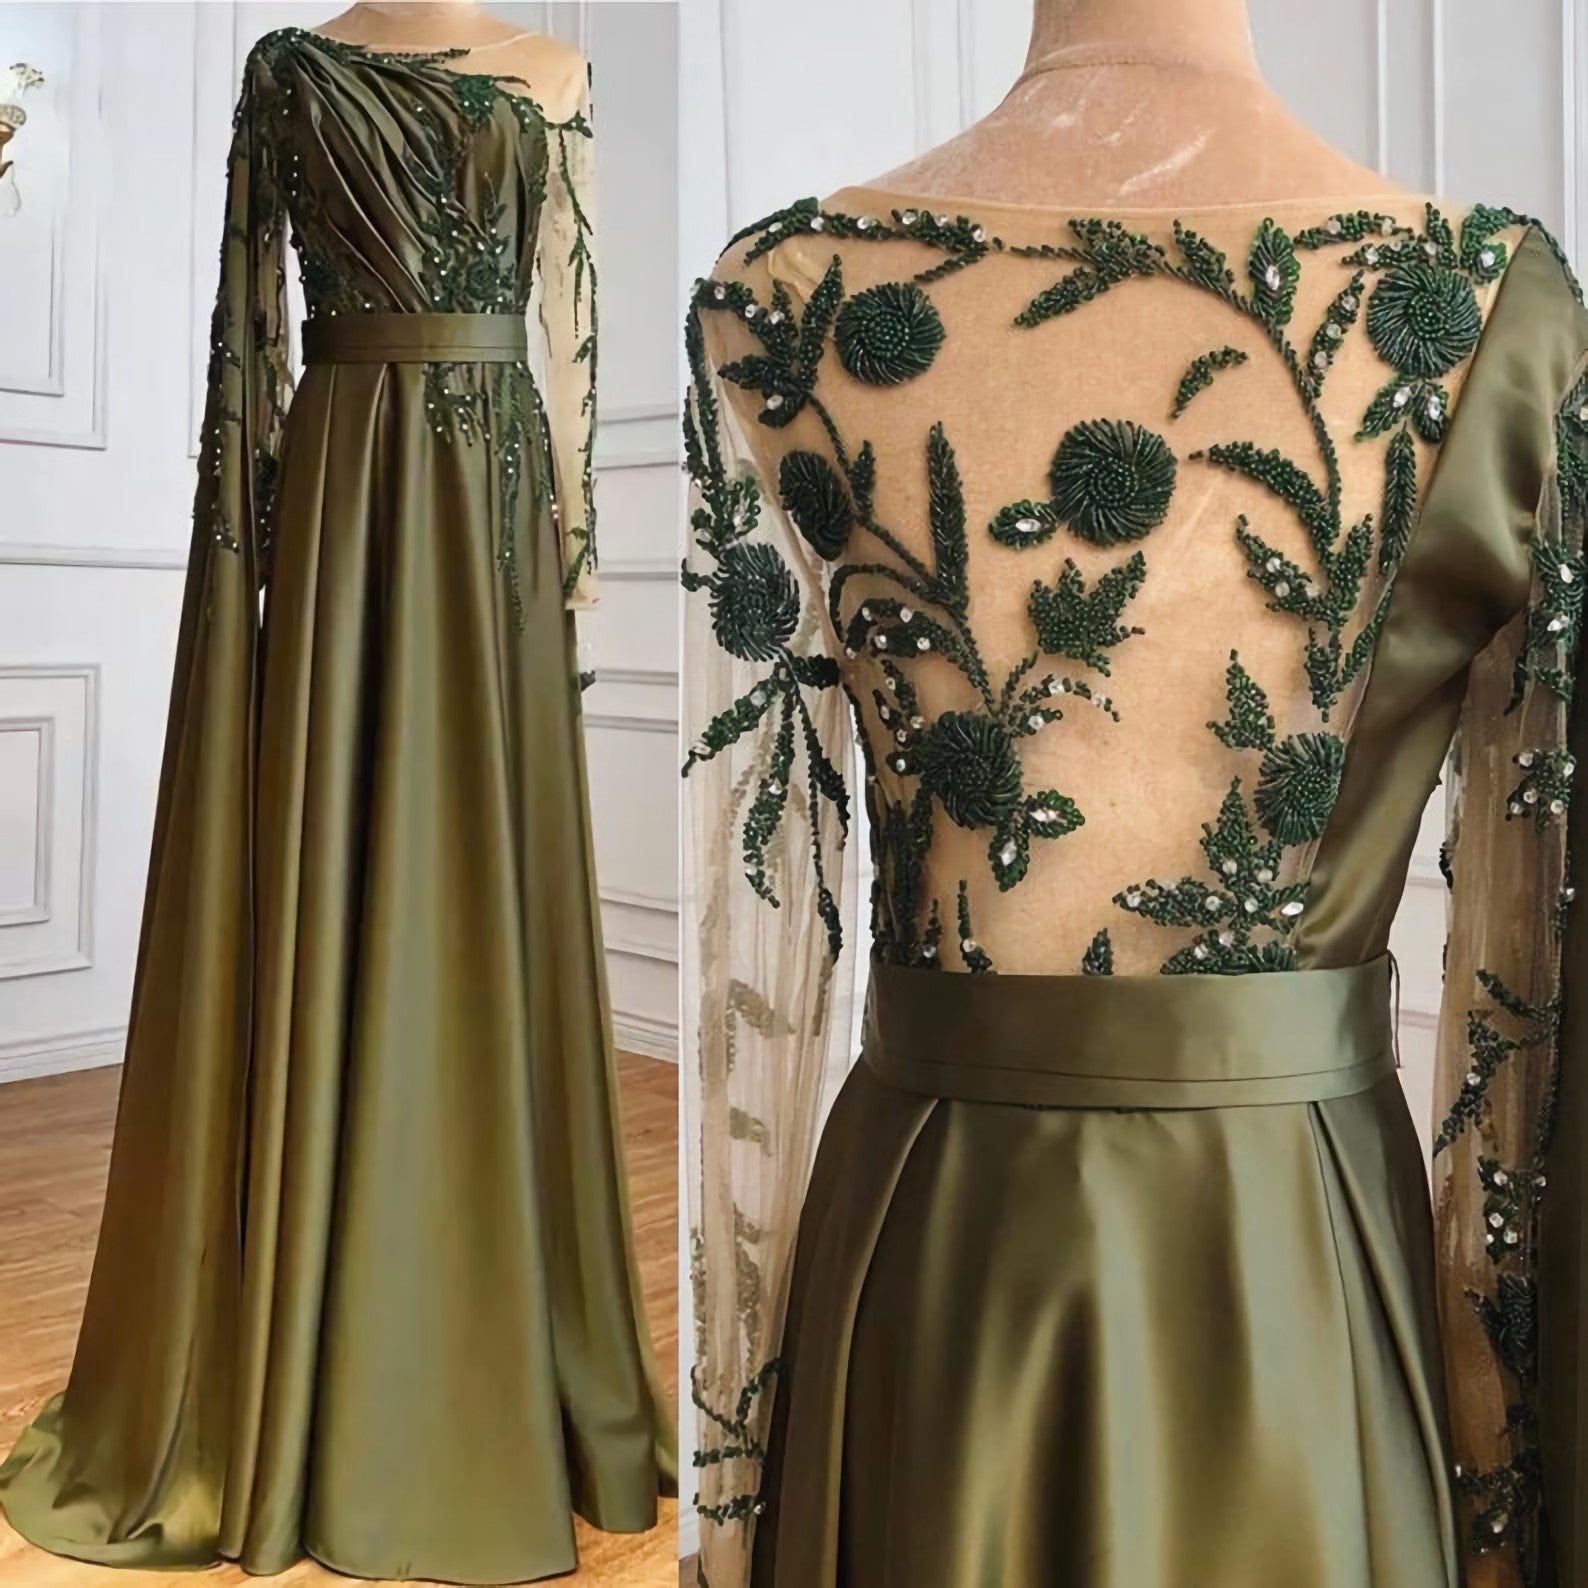 Navy Blue Dress, Luxury Olive Green Evening Moroccan Dress, Beading Sequined Formal Party Wear Gown Dubai Evening Dress